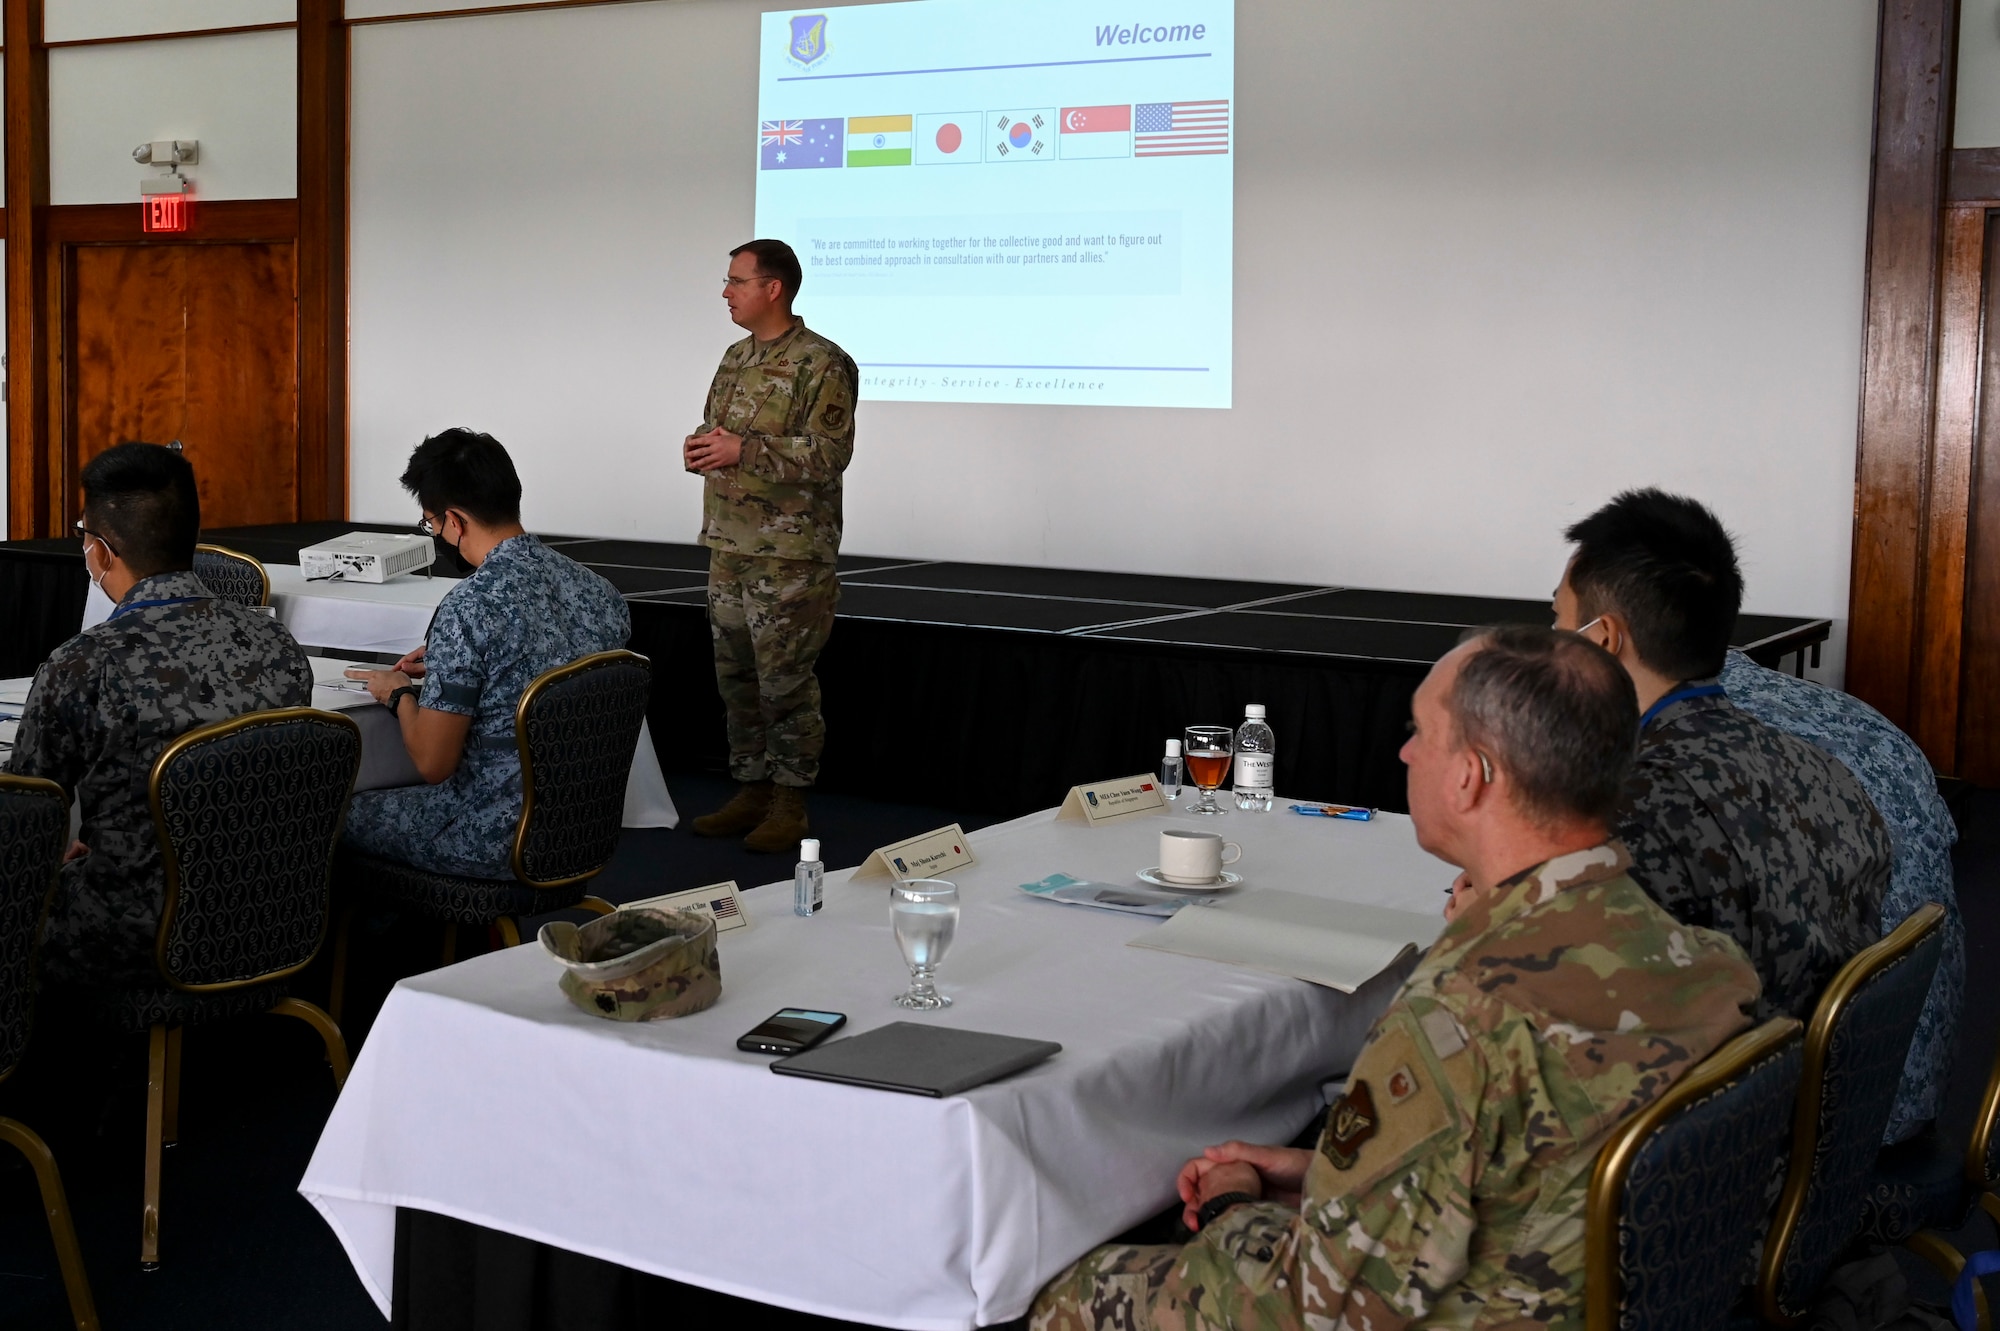 U.S. Air Force Col. David Novy. Chief of the Civil Engineer Division, Pacific Air Forces, gives a welcome brief at the Pacific Unity Multi-Lateral Civil Engineer Key Leader Engagement, June 22, 2022 at Andersen Air Force Base, Guam. Themes during this KLE included topics of shared interest across the allies and partners such as joint capabilities, leveraging expertise in the Total Force, and increased frequency of subject matter expert exchanges and multi-lateral training. (U.S. Air Force Photo by Airman 1st Class Emily Saxton)